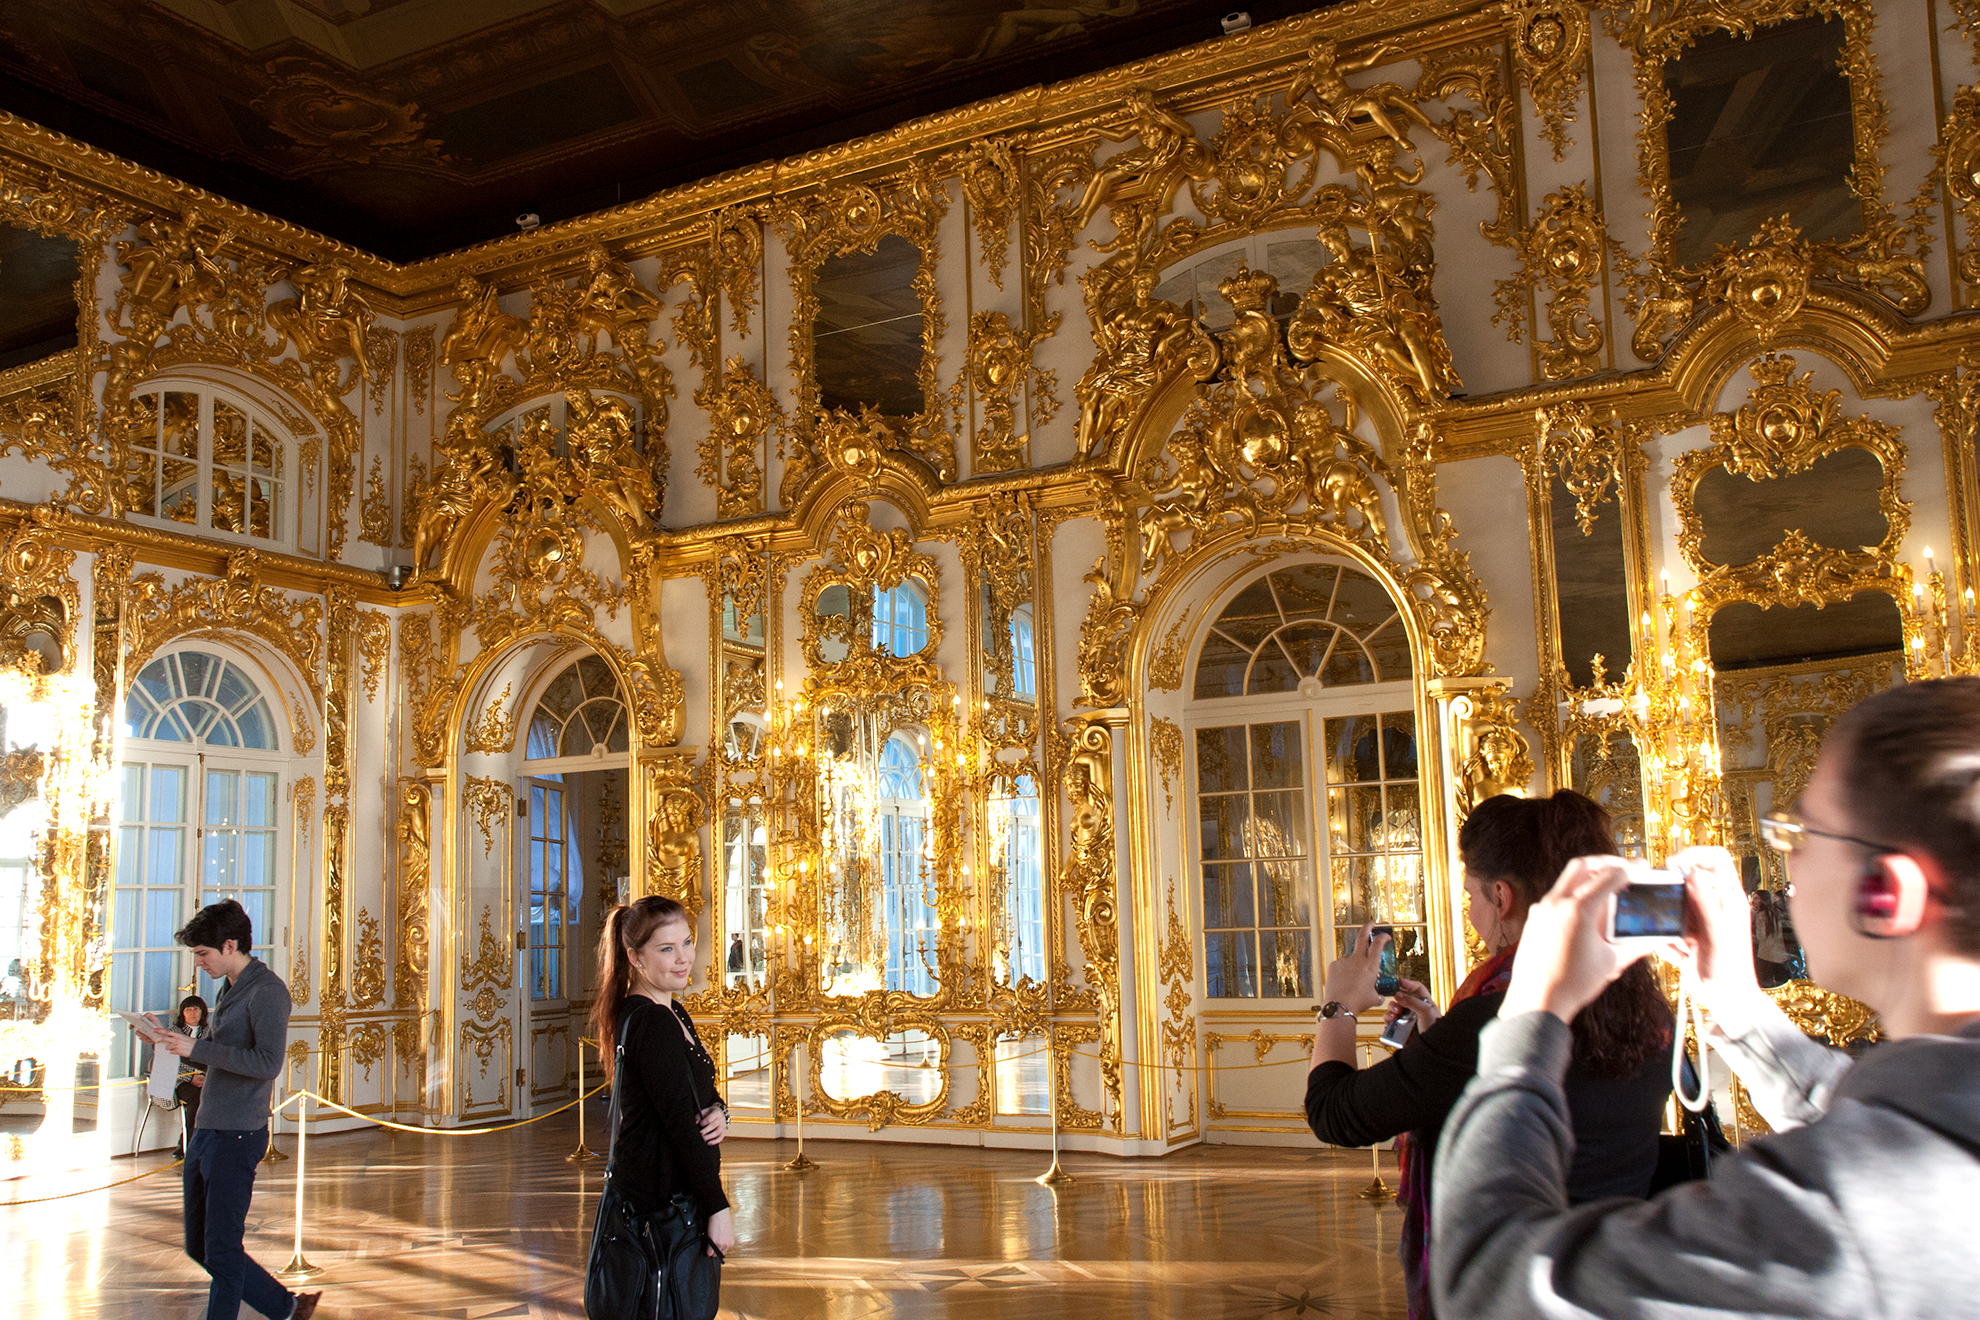 Catherine's palace from inside.